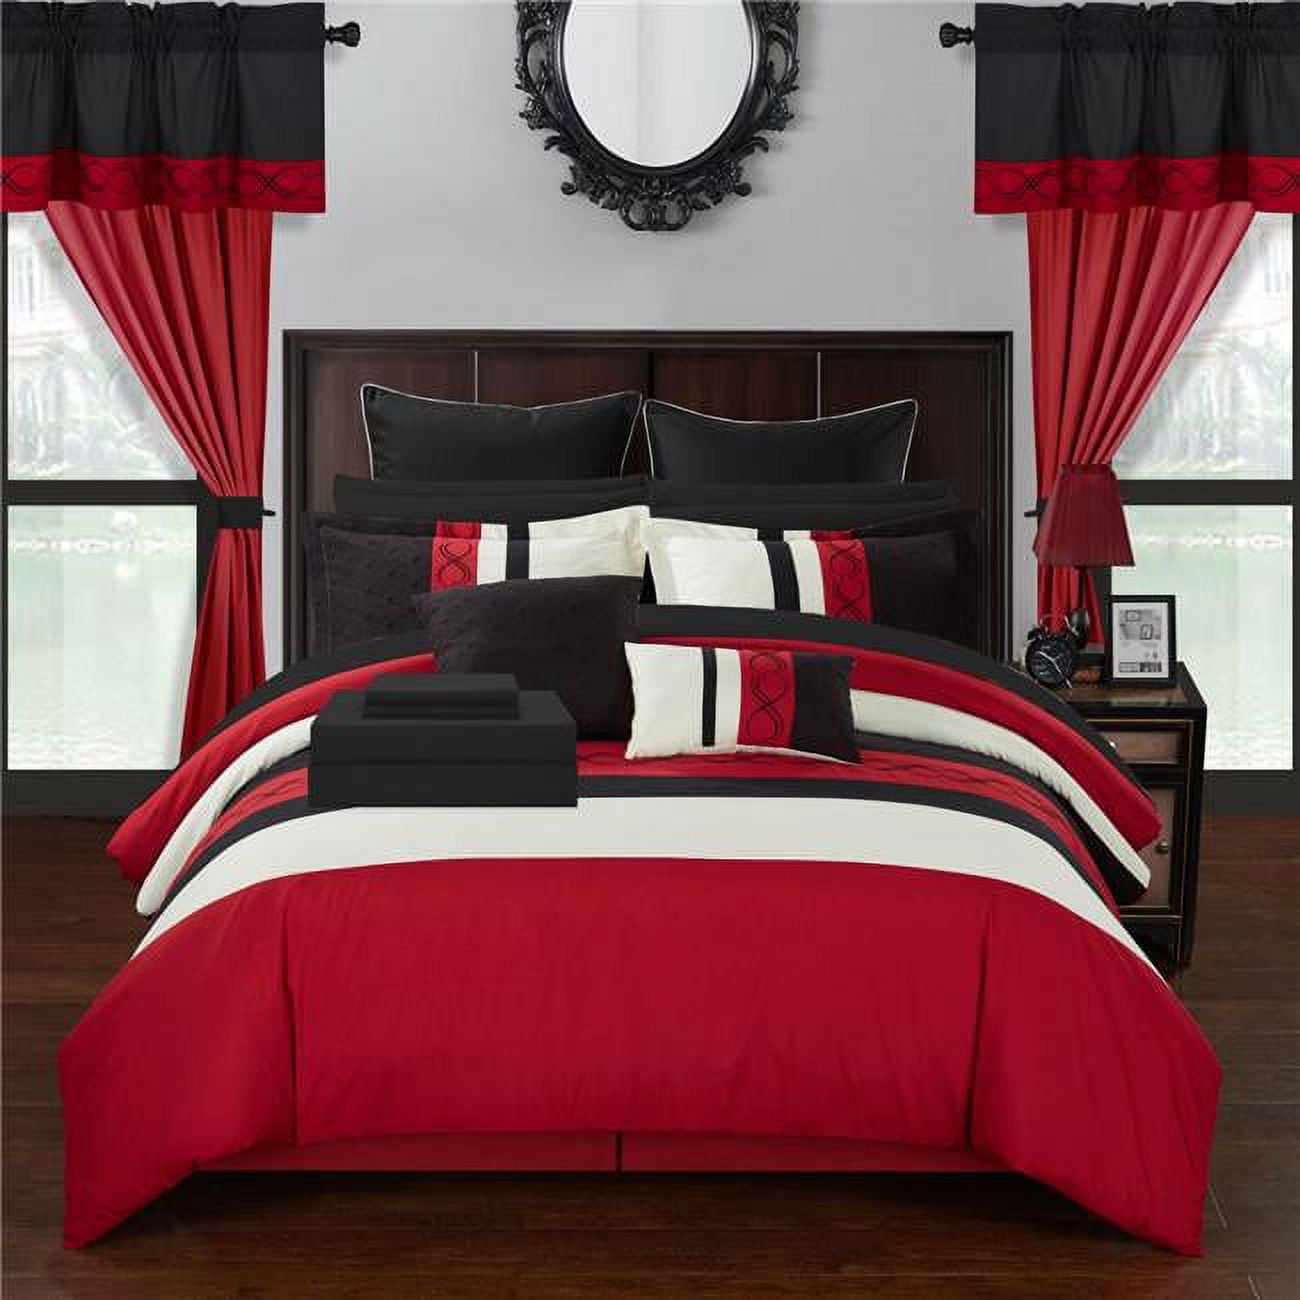 Cs0946-us 24 Piece Shilo Embroidered Design Comforter Bedding Set, Red - Queen